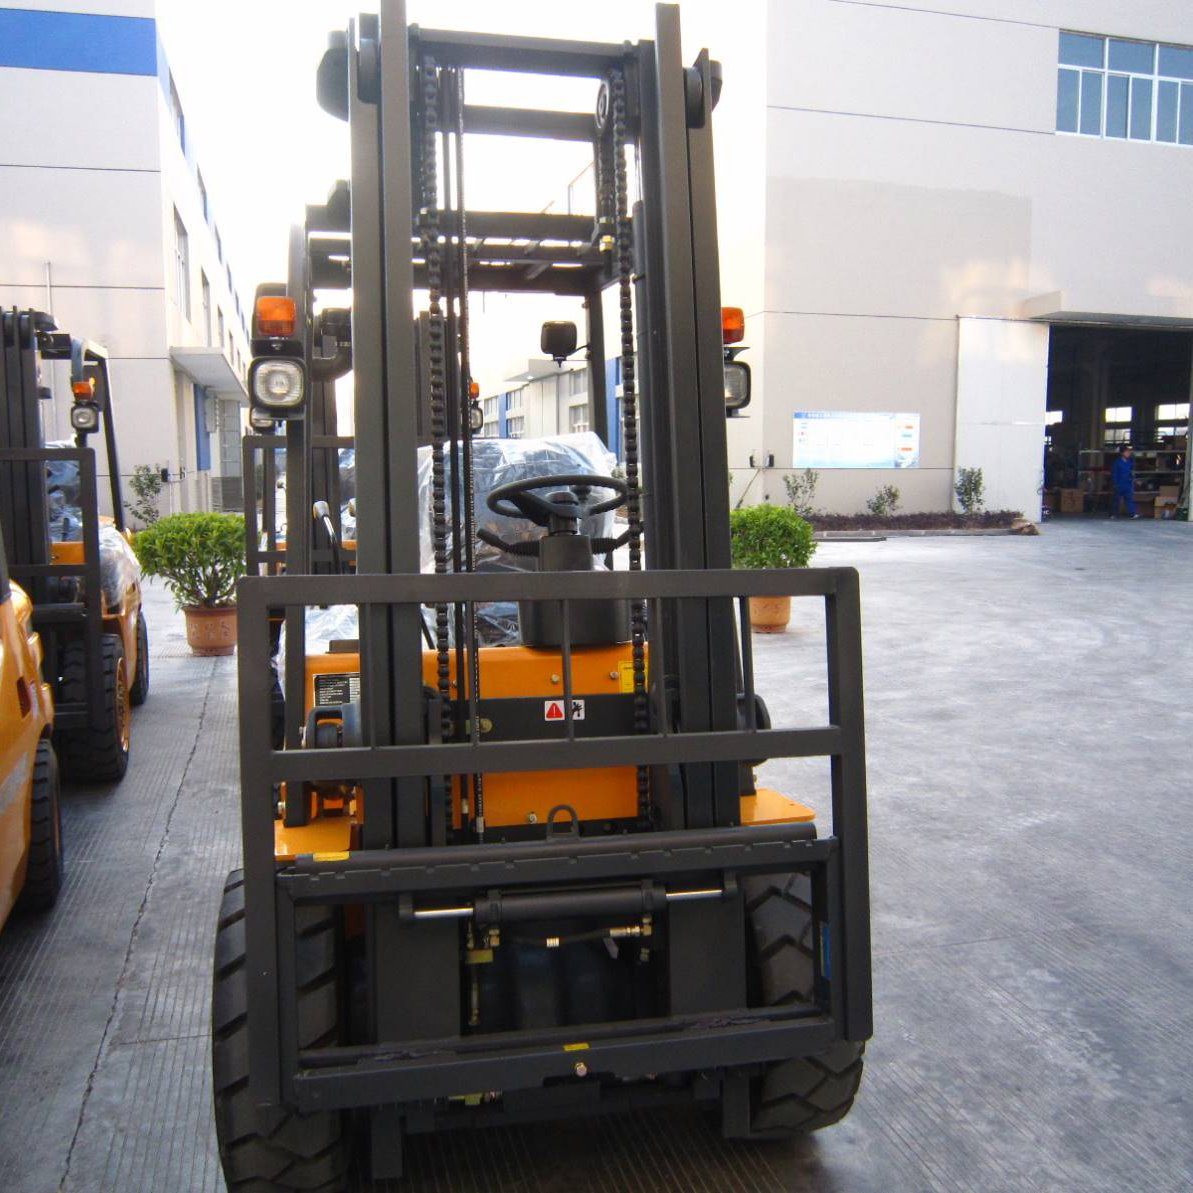 
                Huahe 3.5 Ton Mini Forklift Hh35 Working in Container
            